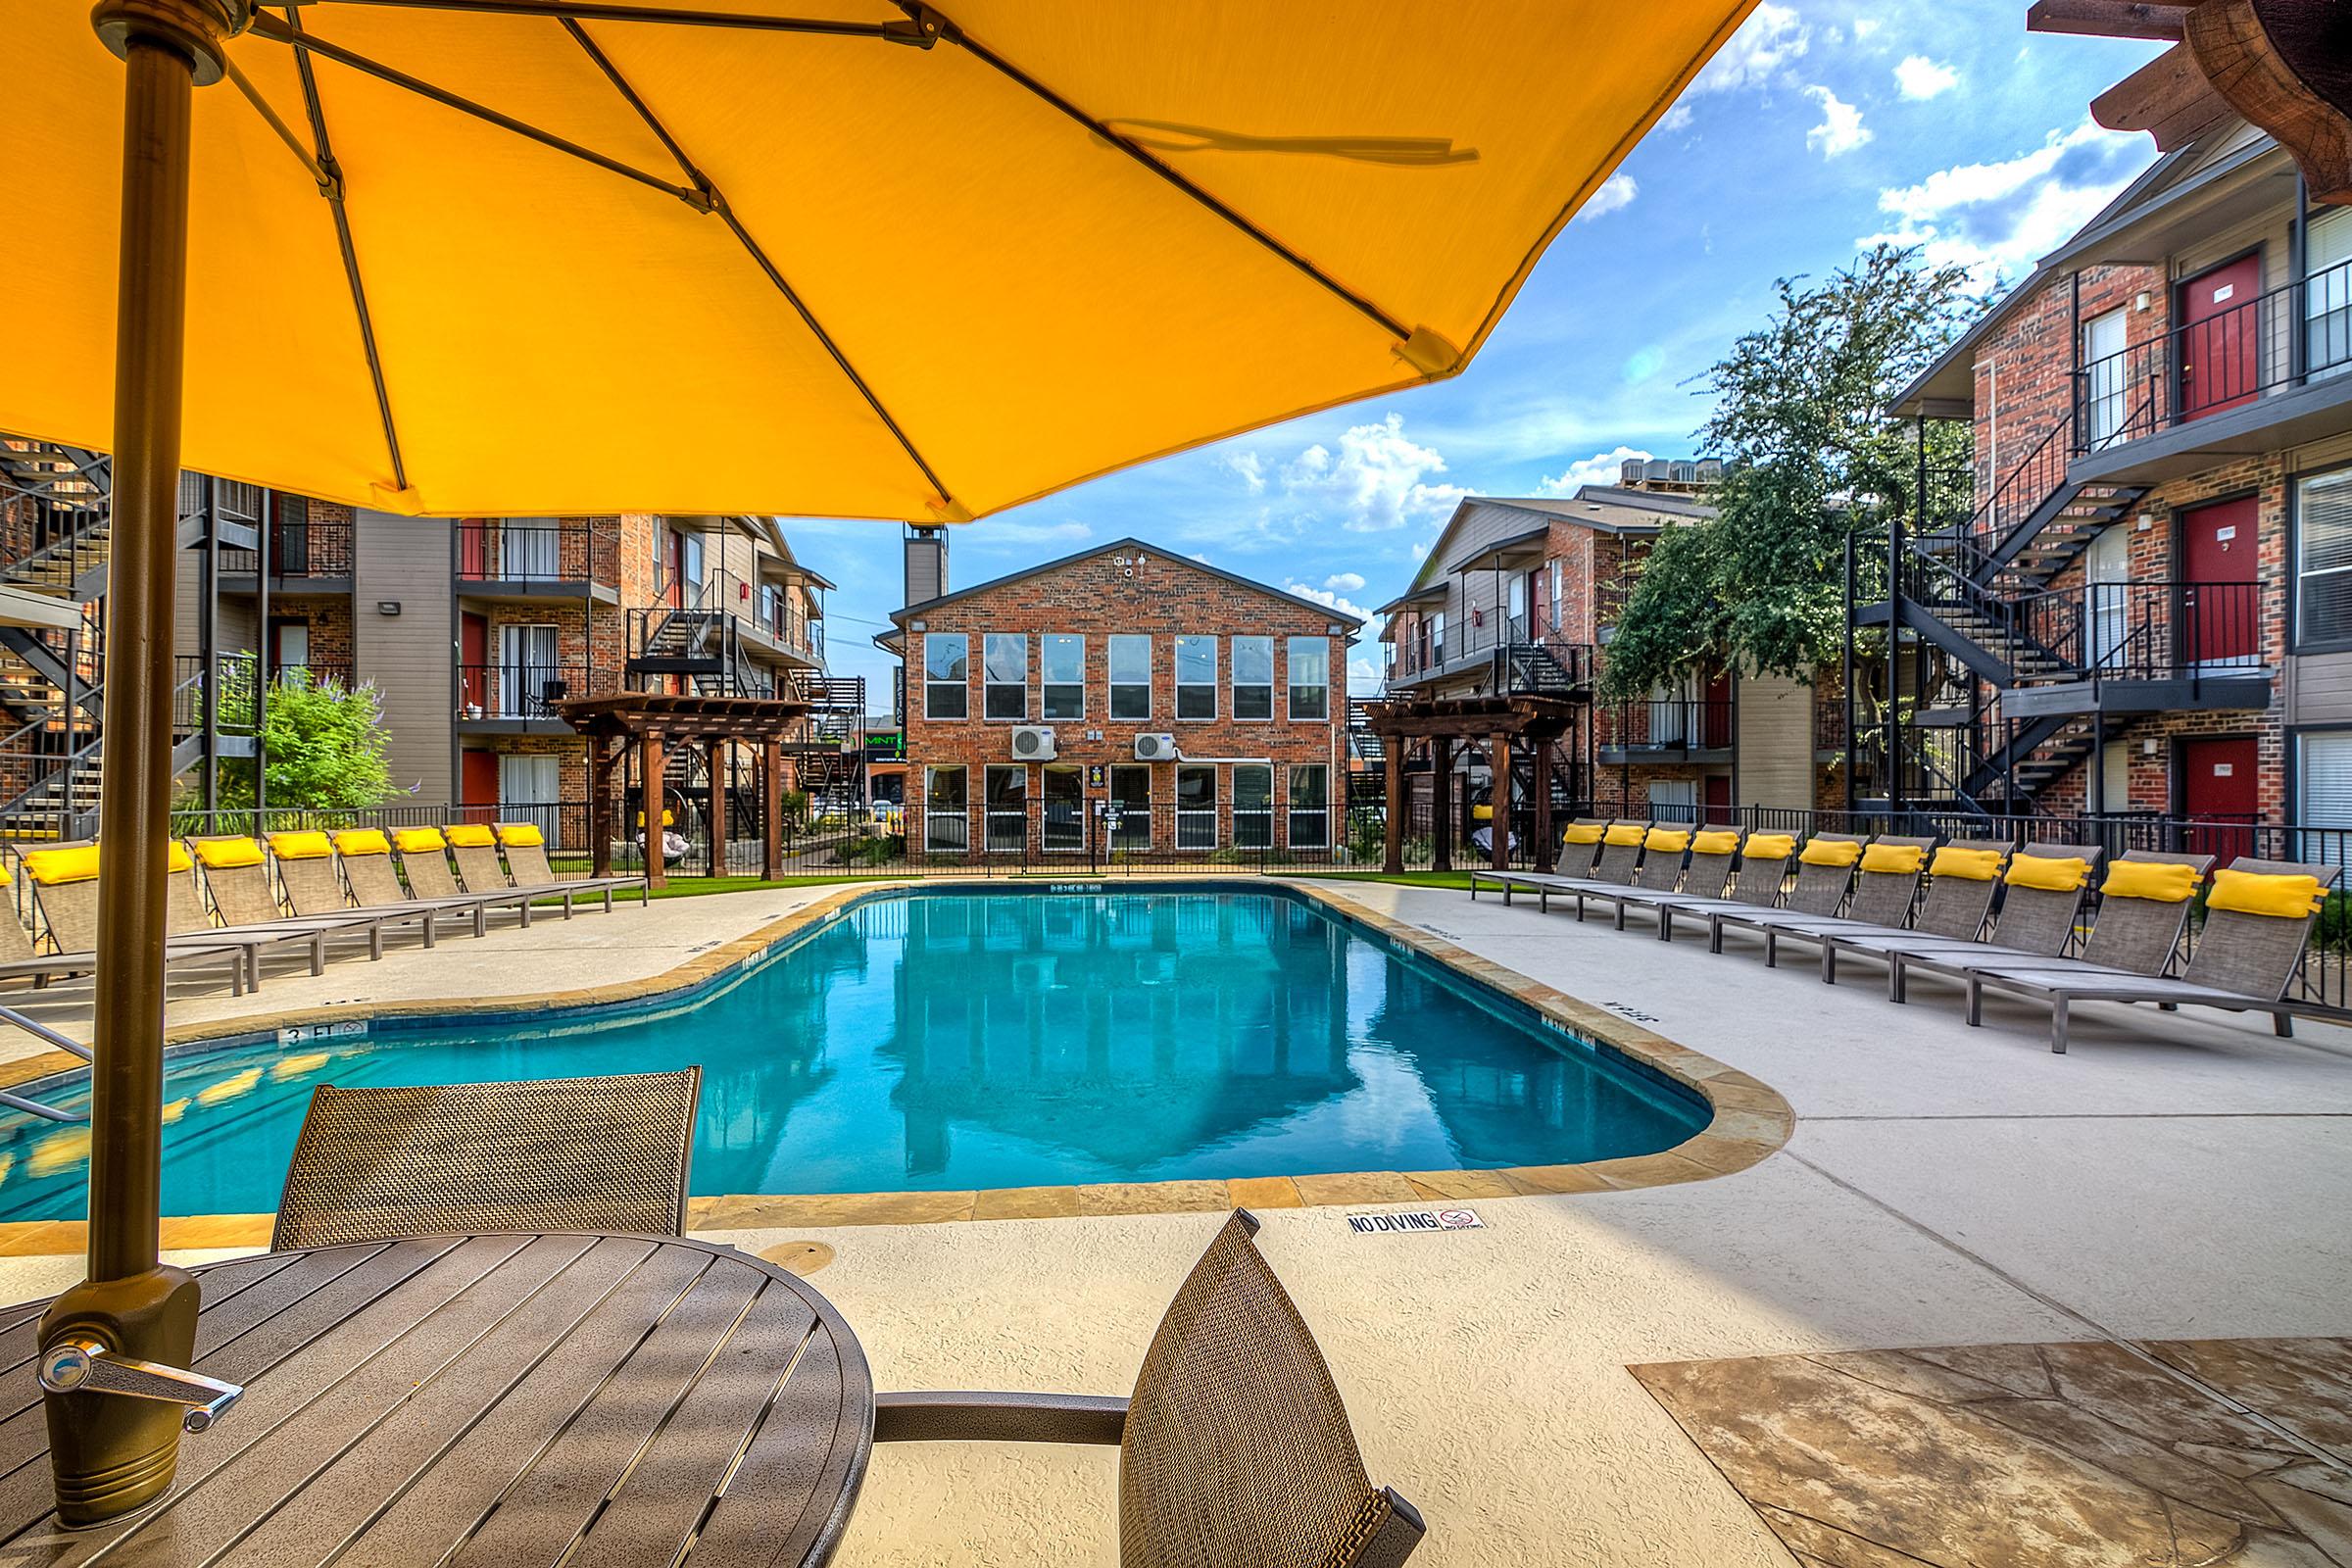 The Edge community pool with a yellow umbrella